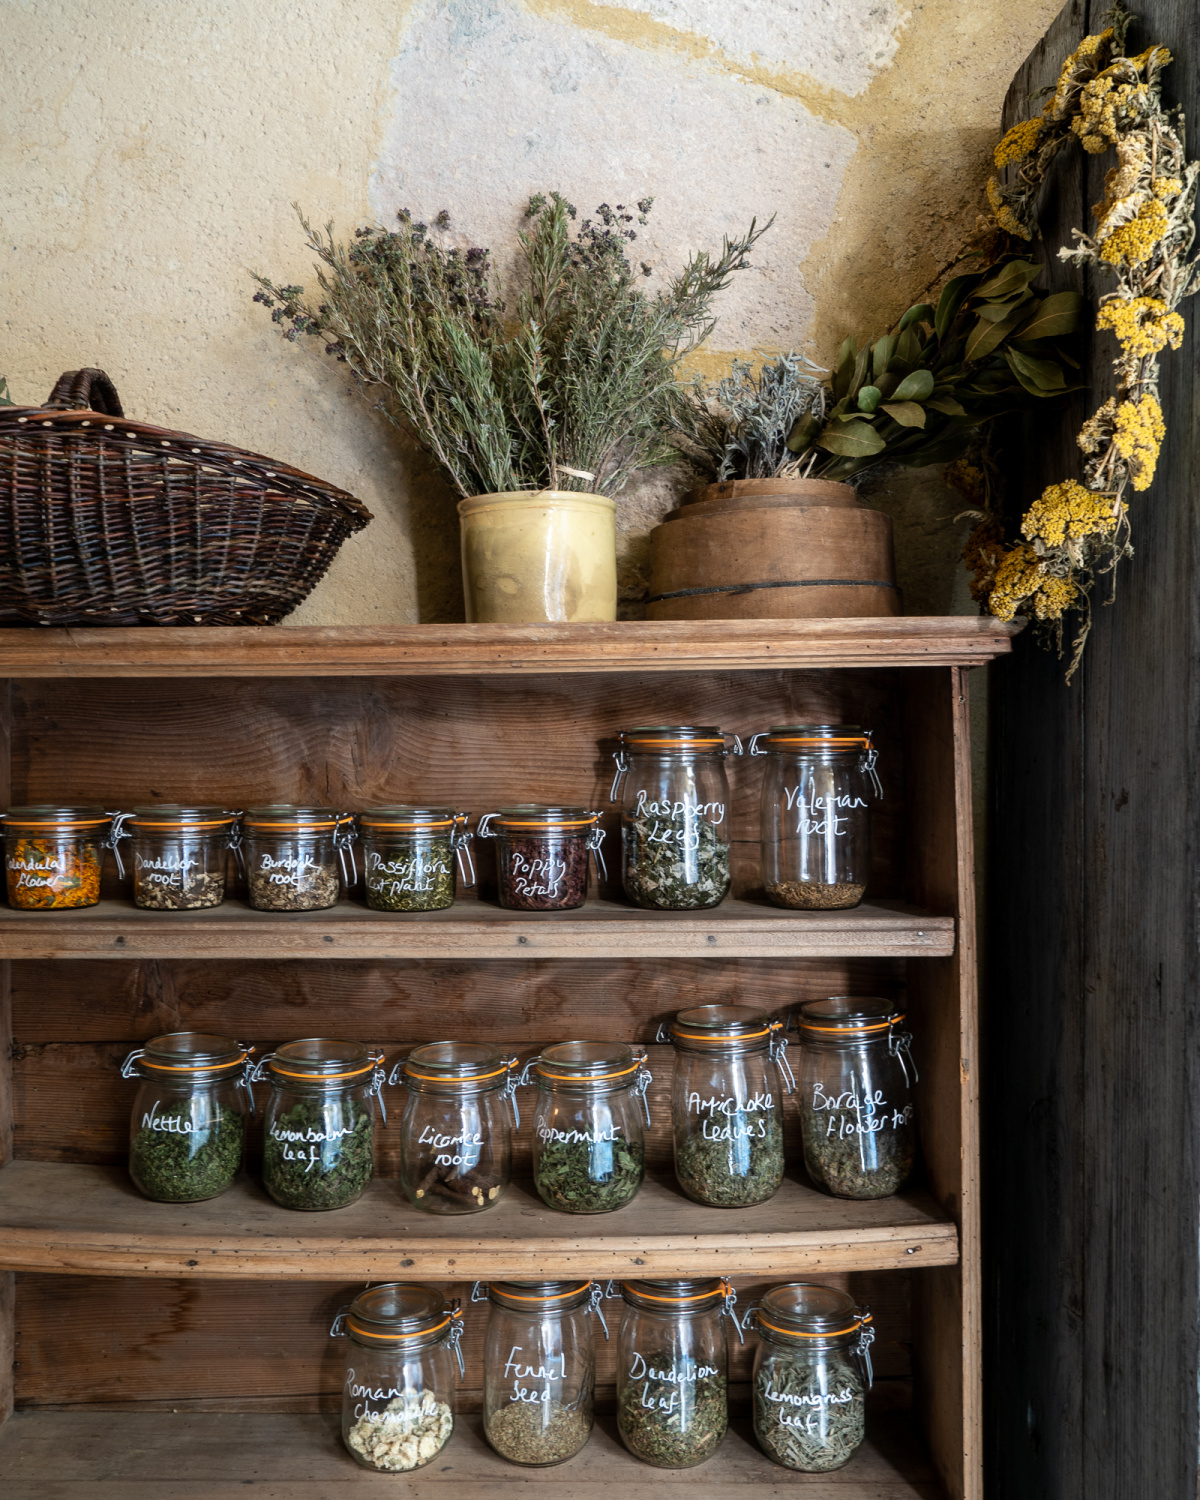 jars of dried herbs on a wooden shelf